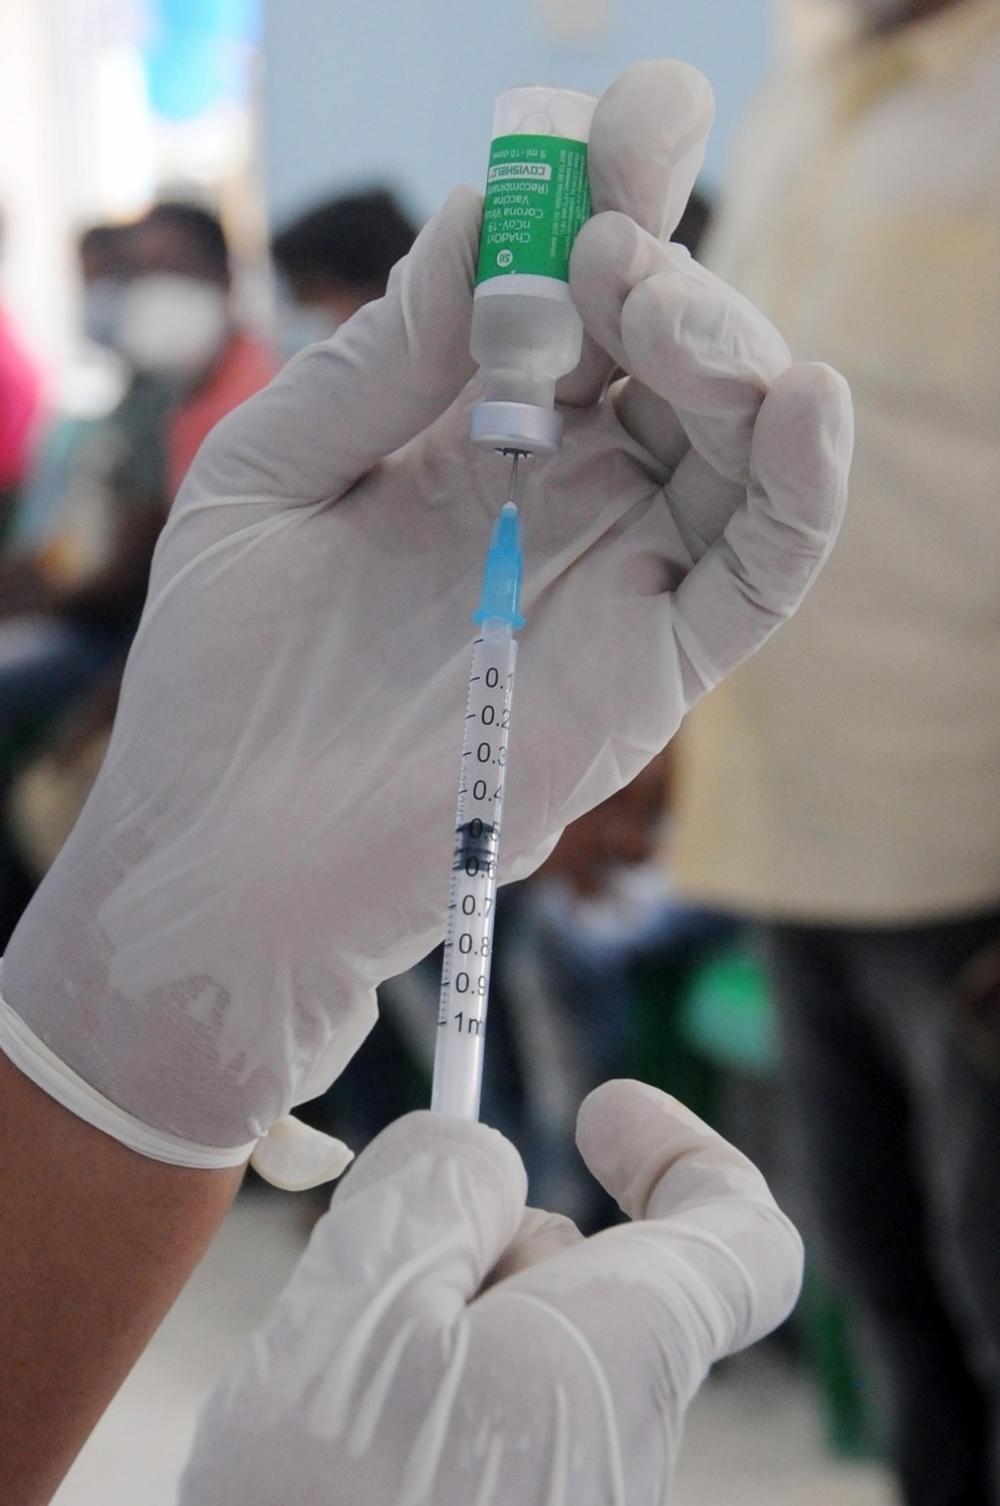 The Weekend Leader - 15 more nations recognise India's Covid vaccines